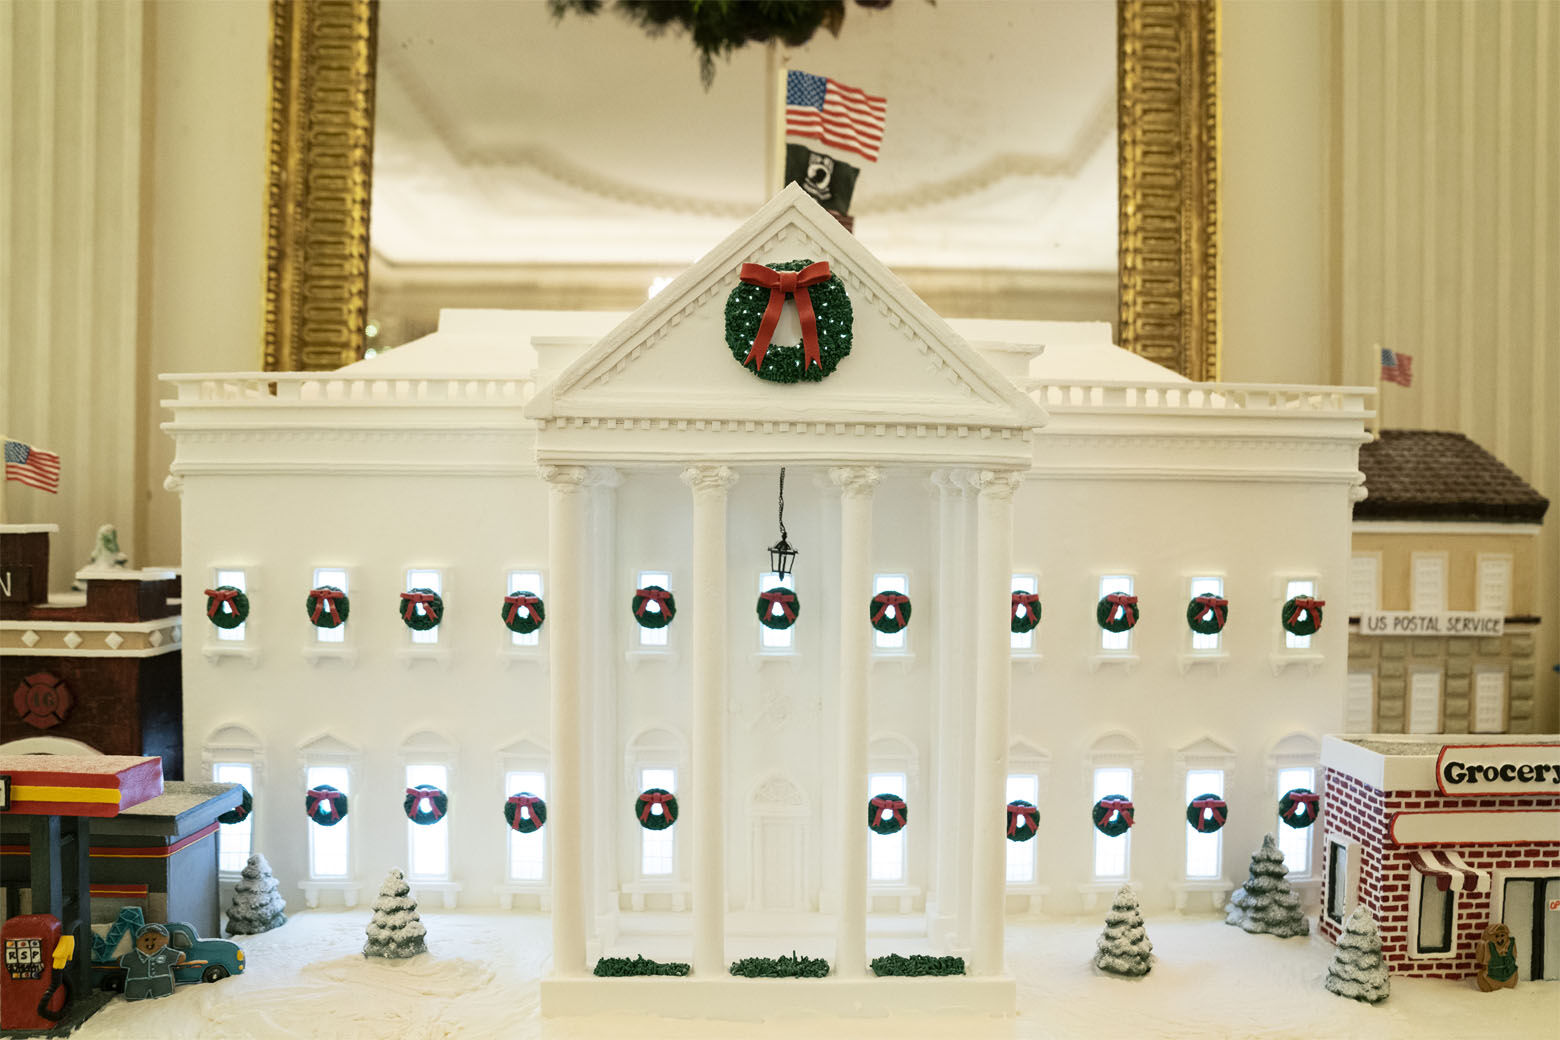 A White House gingerbread house sits in the State Dining Room during a press preview of the White House holiday decorations, Monday, Nov. 29, 2021, in Washington. (AP Photo/Evan Vucci)